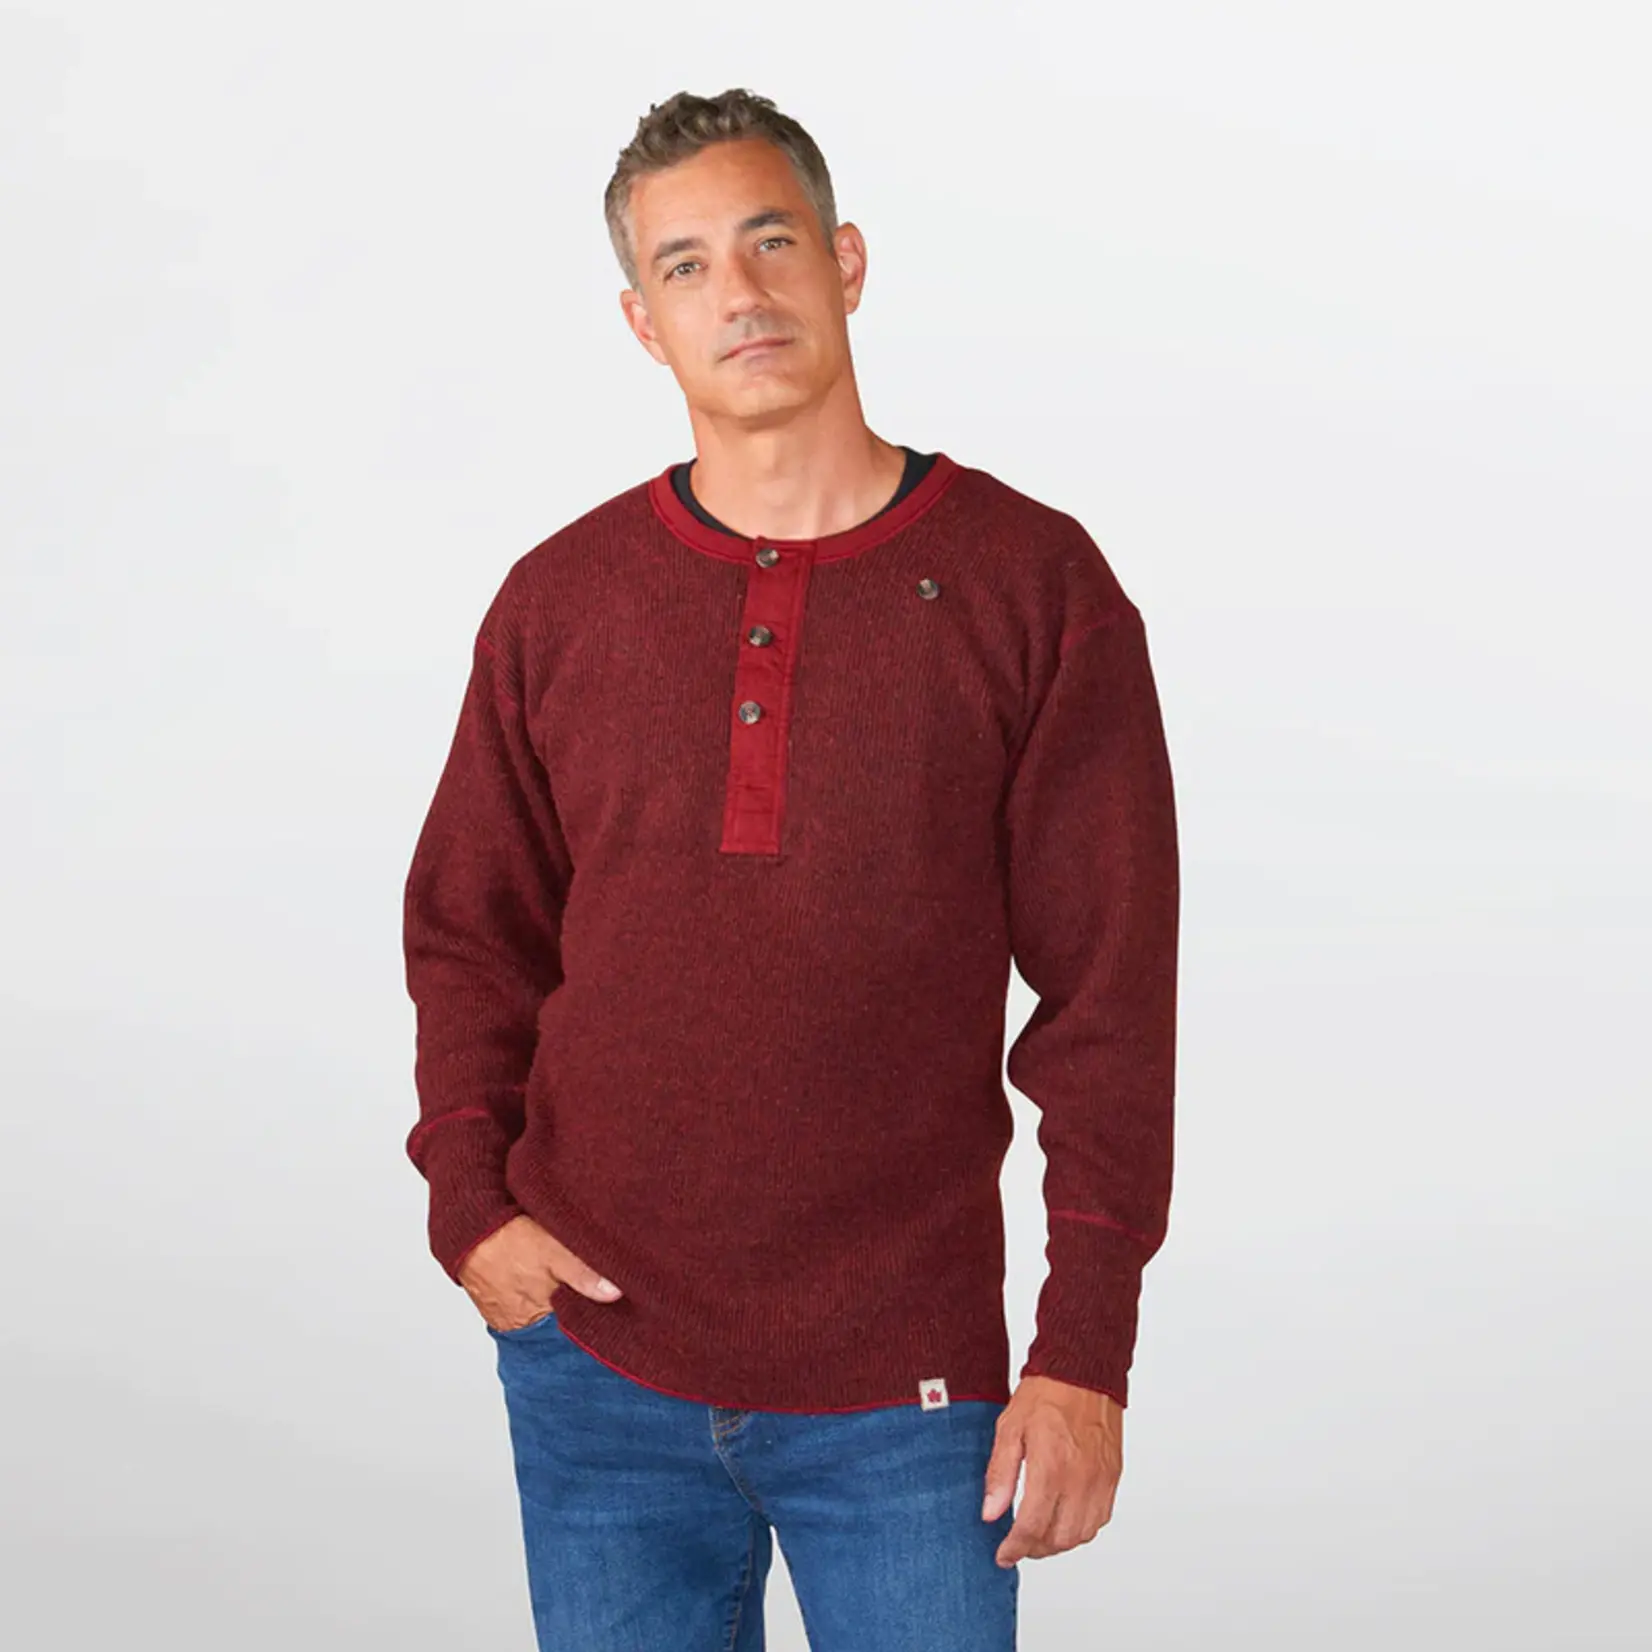 Stanfield's Henley Shirt - Heavy Weight Wool With Lining - 1315L